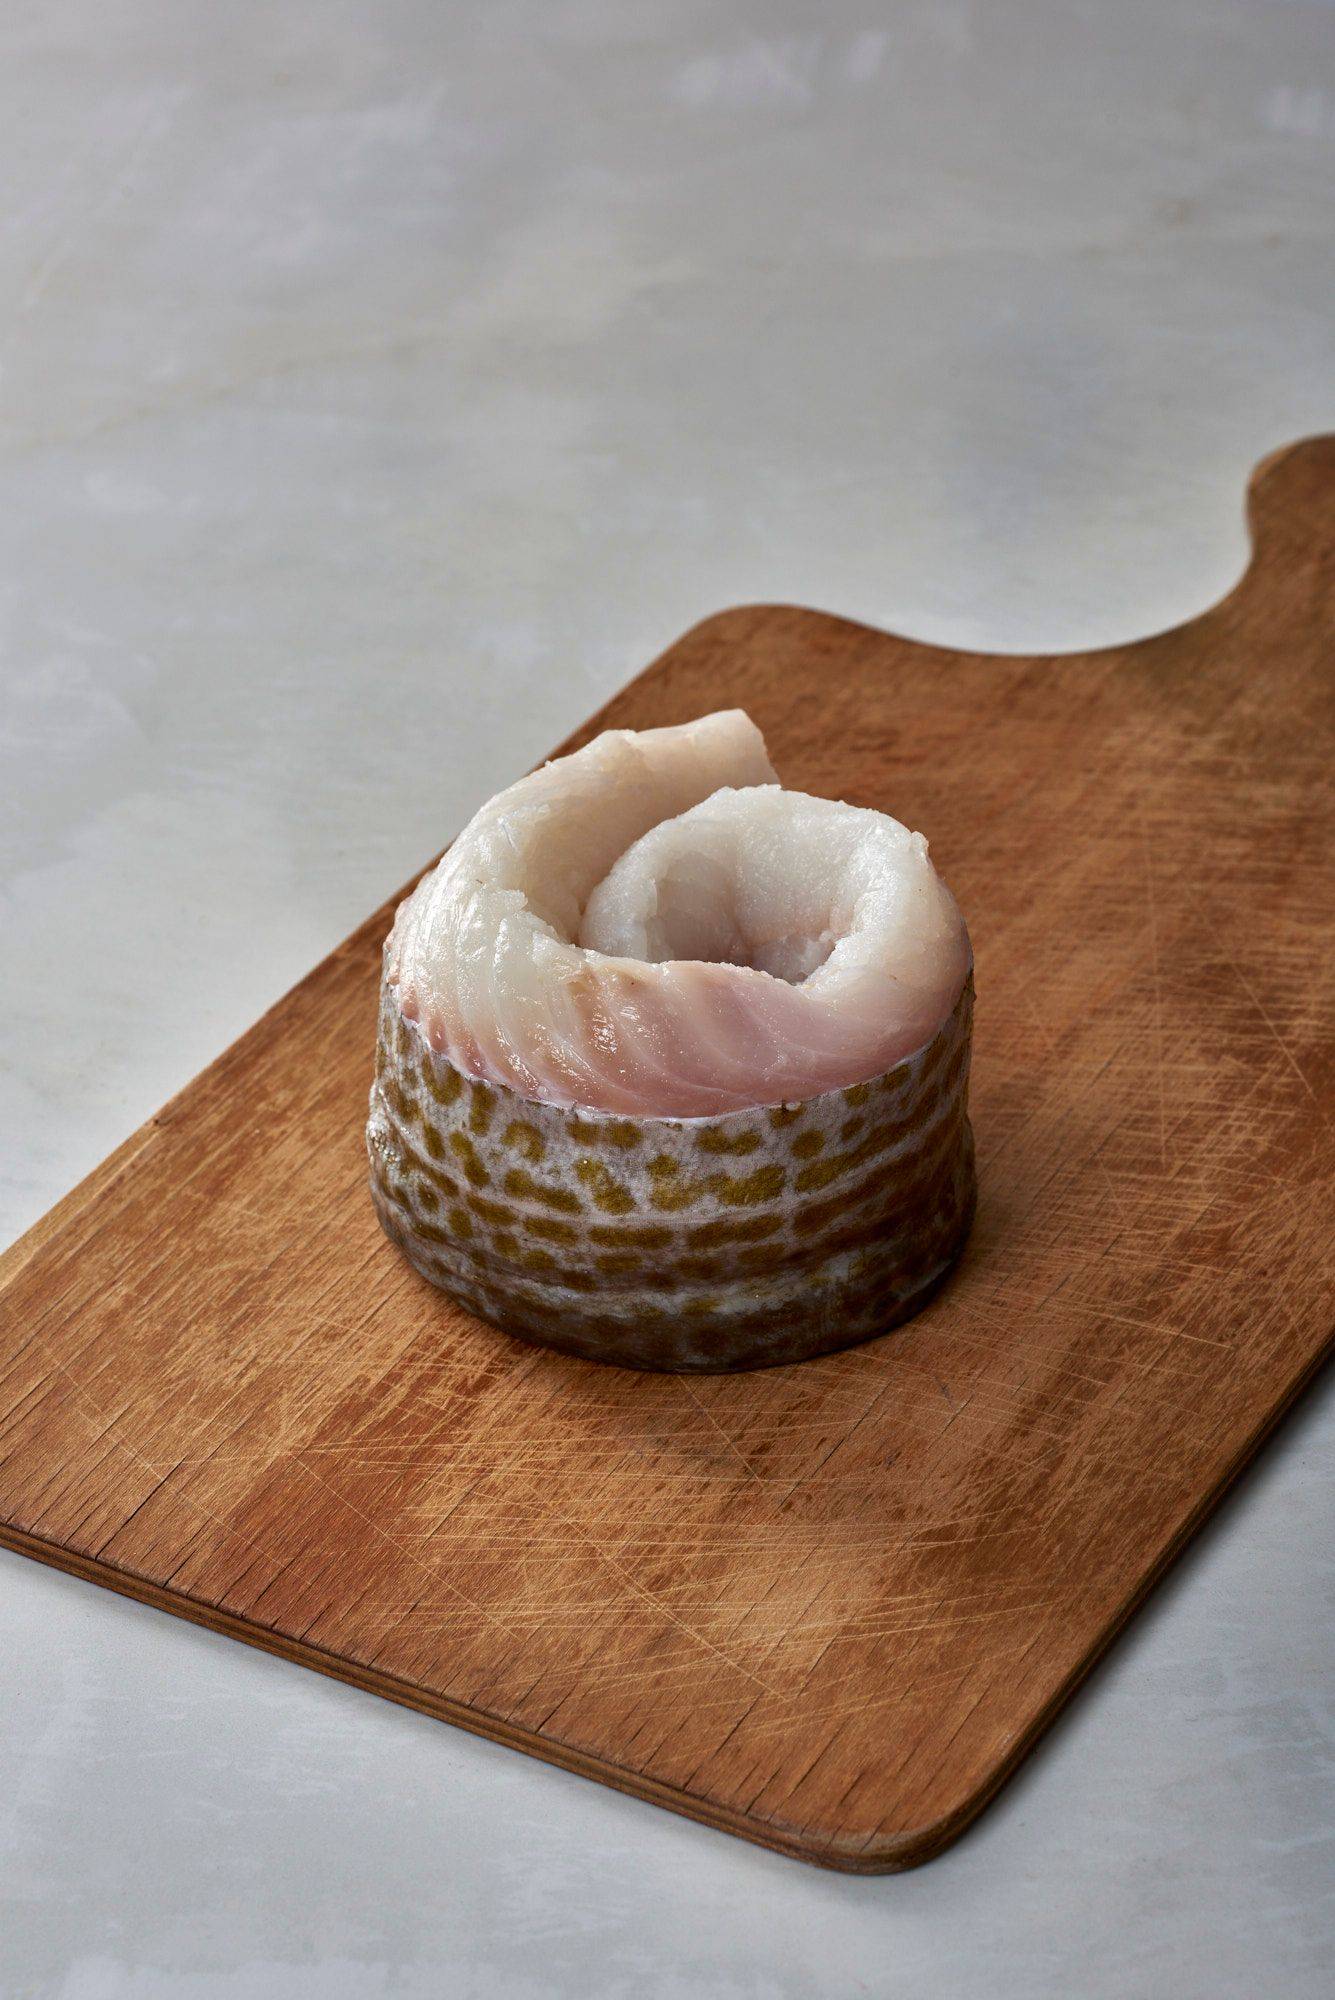 cod fish fillet on a wooden board with white sapienstone top